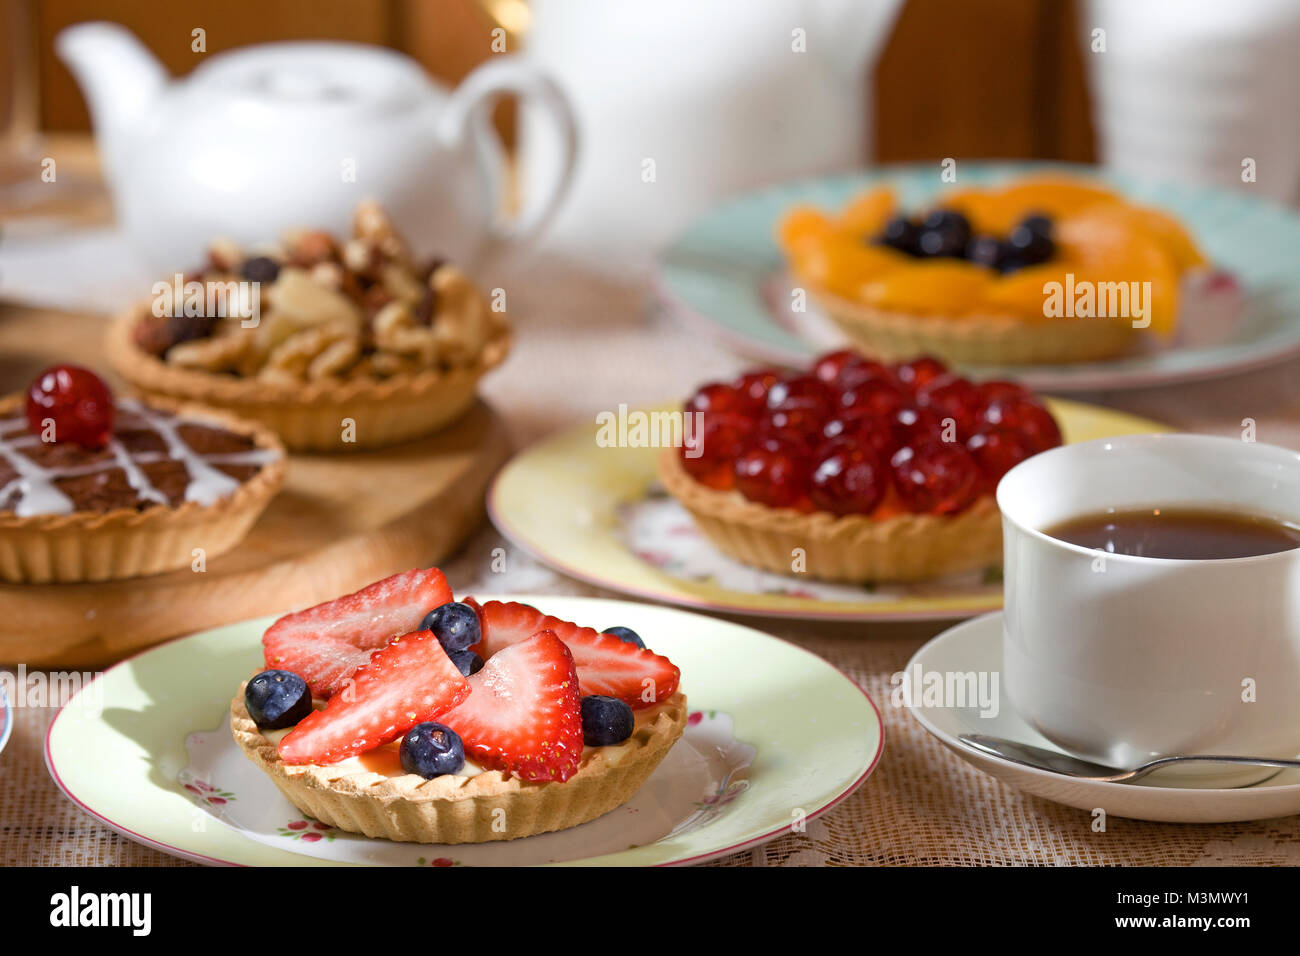 A selection of fruit tarts with strawberry and blueberry tart in the foreground Stock Photo